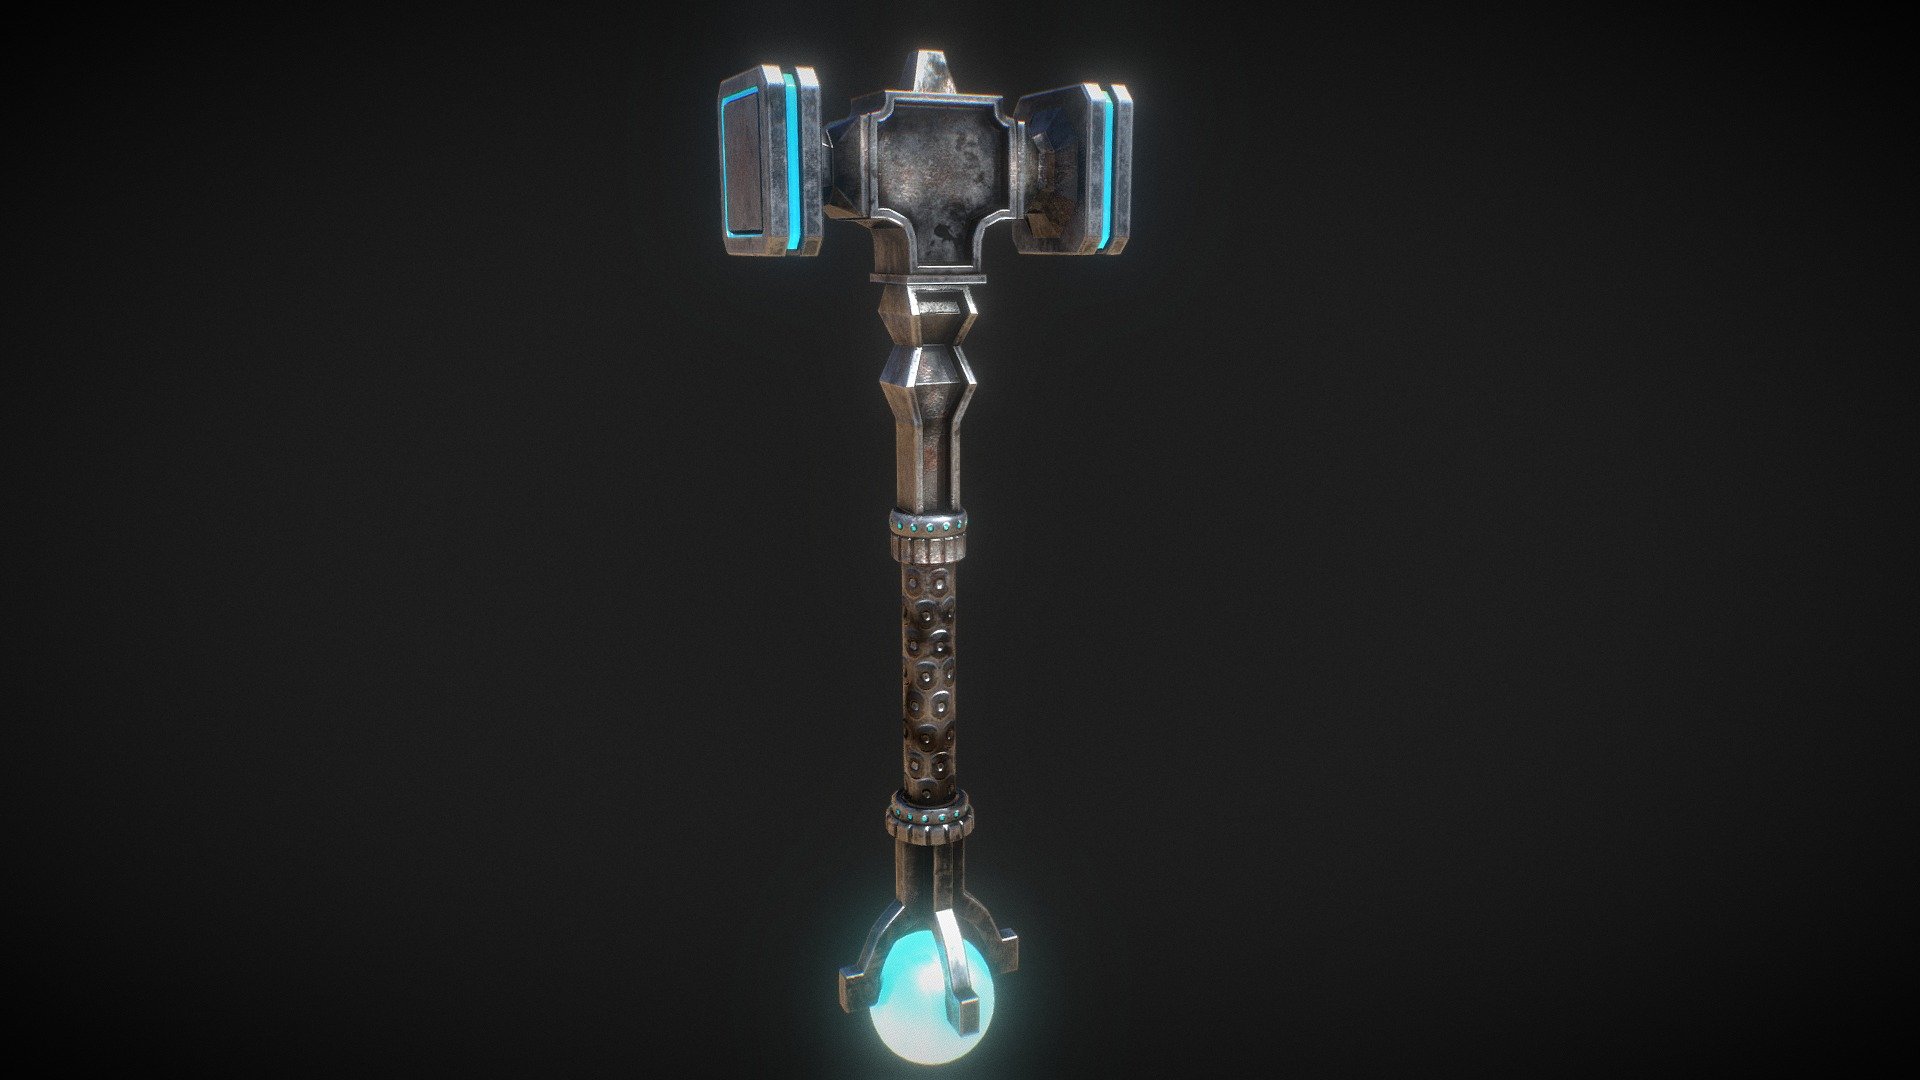 I'm working on becoming more proficient with Substance Painter. I modeled the mace in Maya, Textured in Substance Painter, and rendered it in Iray 3d model